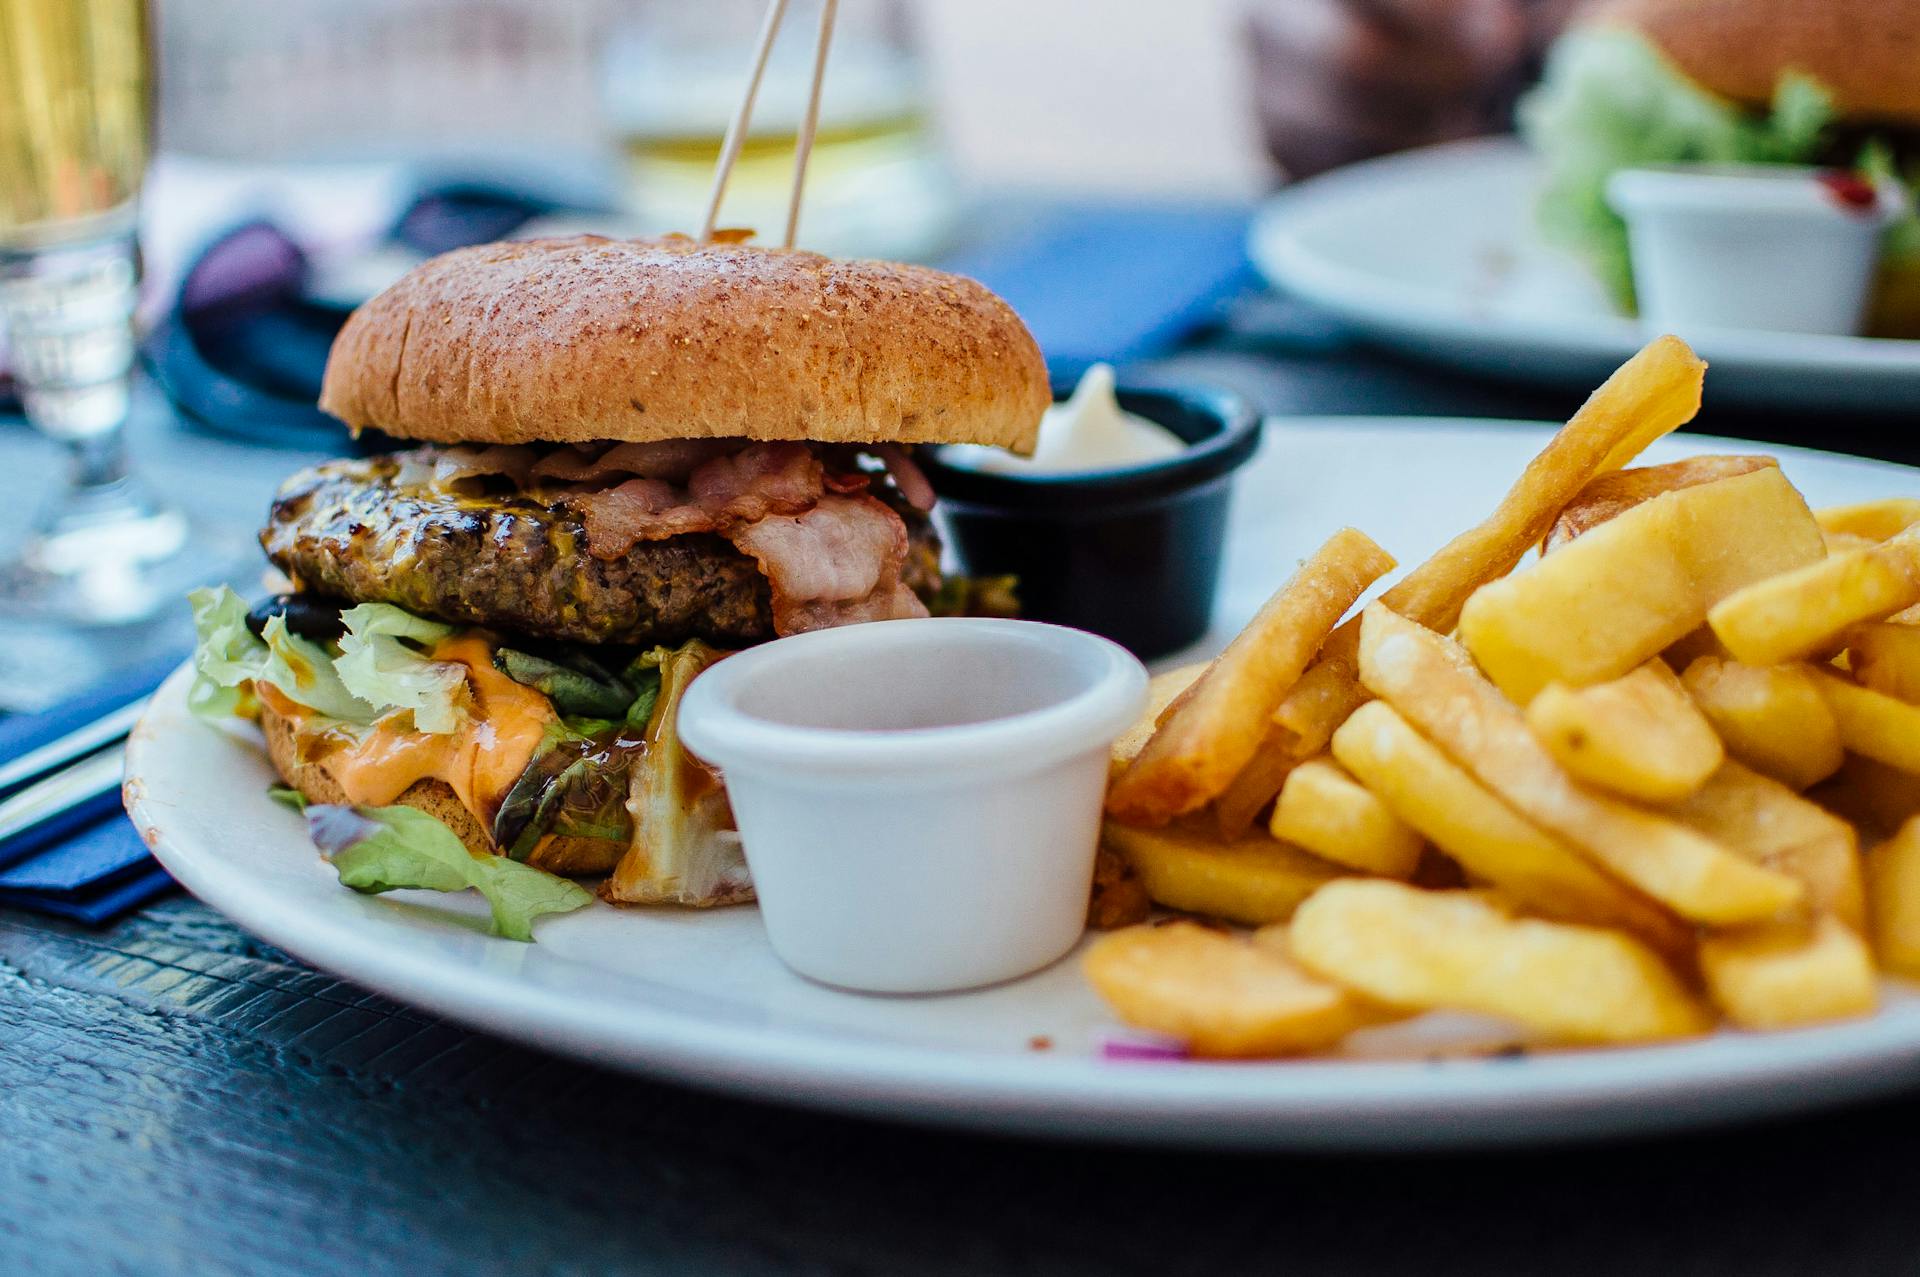 A burger and fries on a plate | Source: Pexels